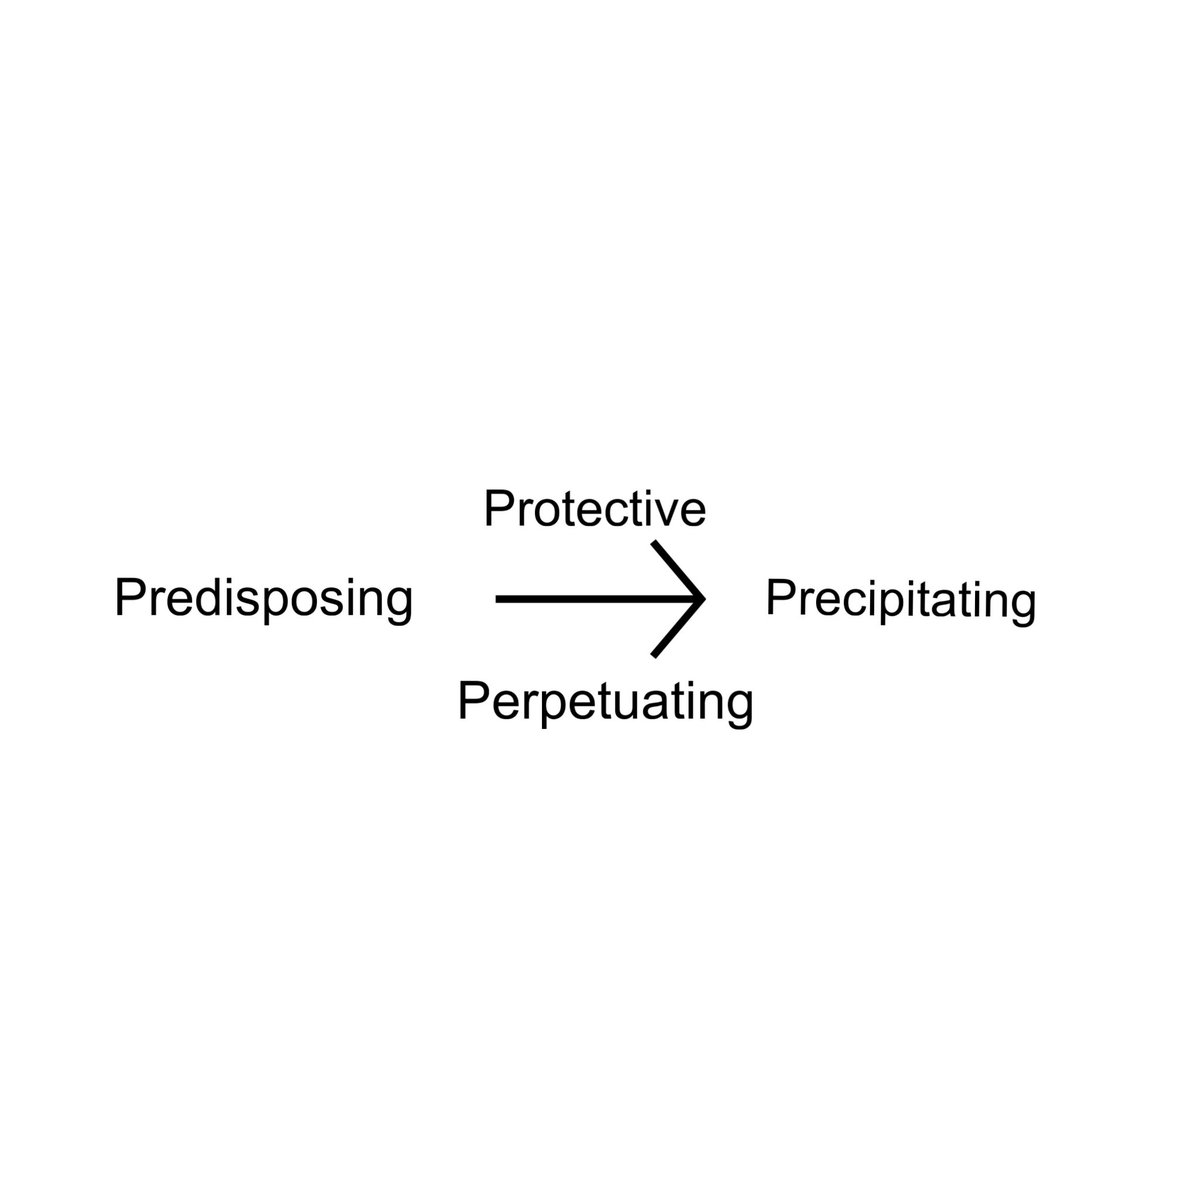 4Ps as Diathesis Stress Model

Predisposing = Diathesis (Vulnerability) 
Precipitating = Stress (Triggers) 
Perpetuating = Reinforces 
Protective = Strengths 

High Protective, Low Perpetuating = Low Precipitation 

Low Protective, High Perpetuating = High Precipitation